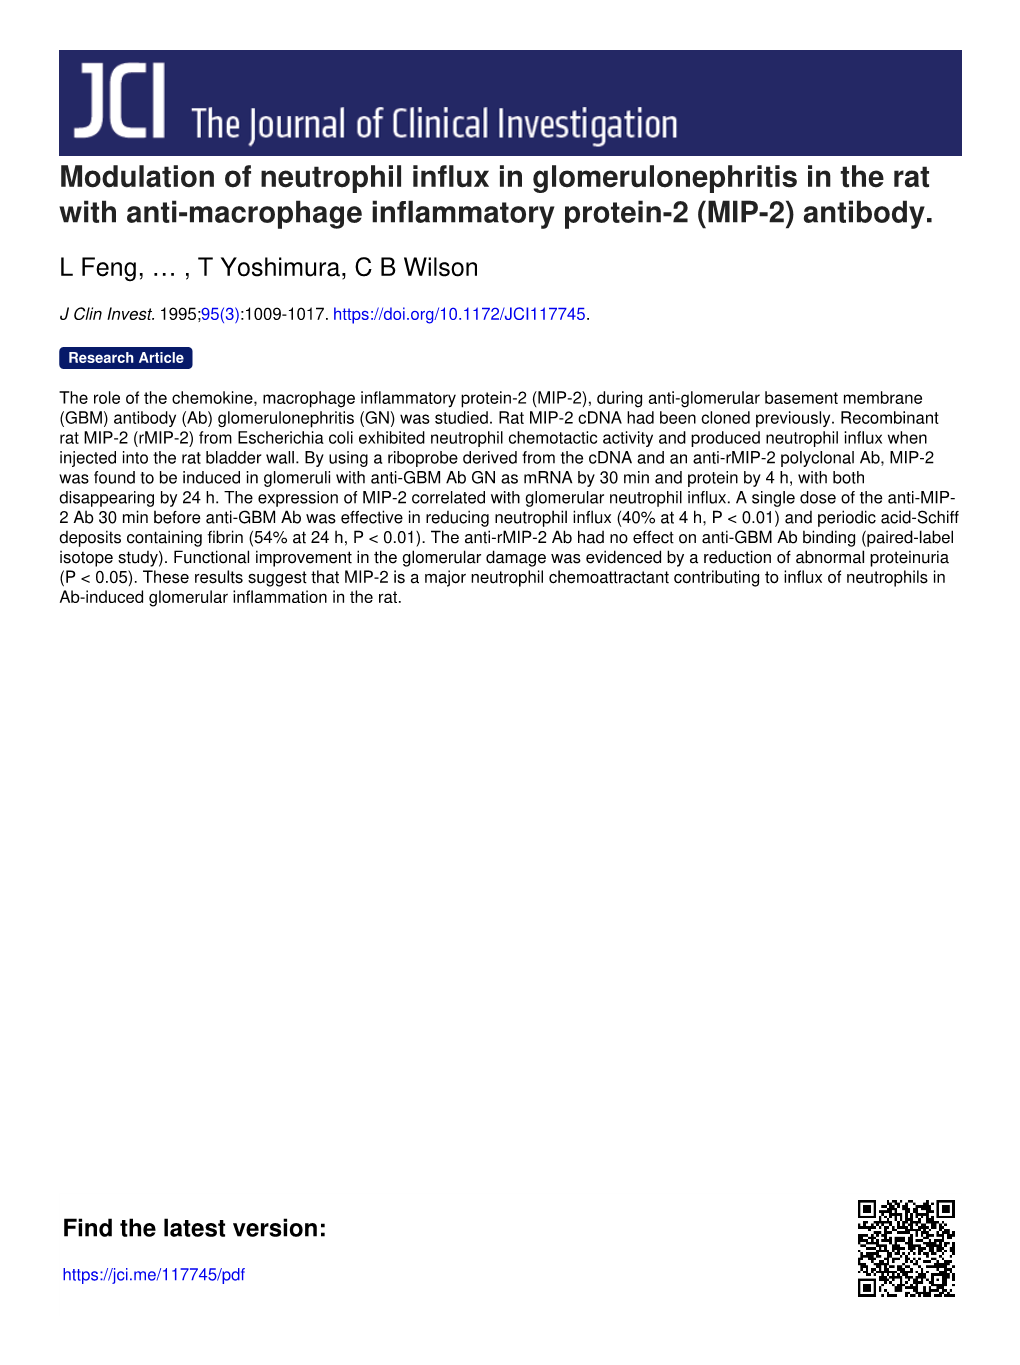 Modulation of Neutrophil Influx in Glomerulonephritis in the Rat with Anti-Macrophage Inflammatory Protein-2 (MIP-2) Antibody